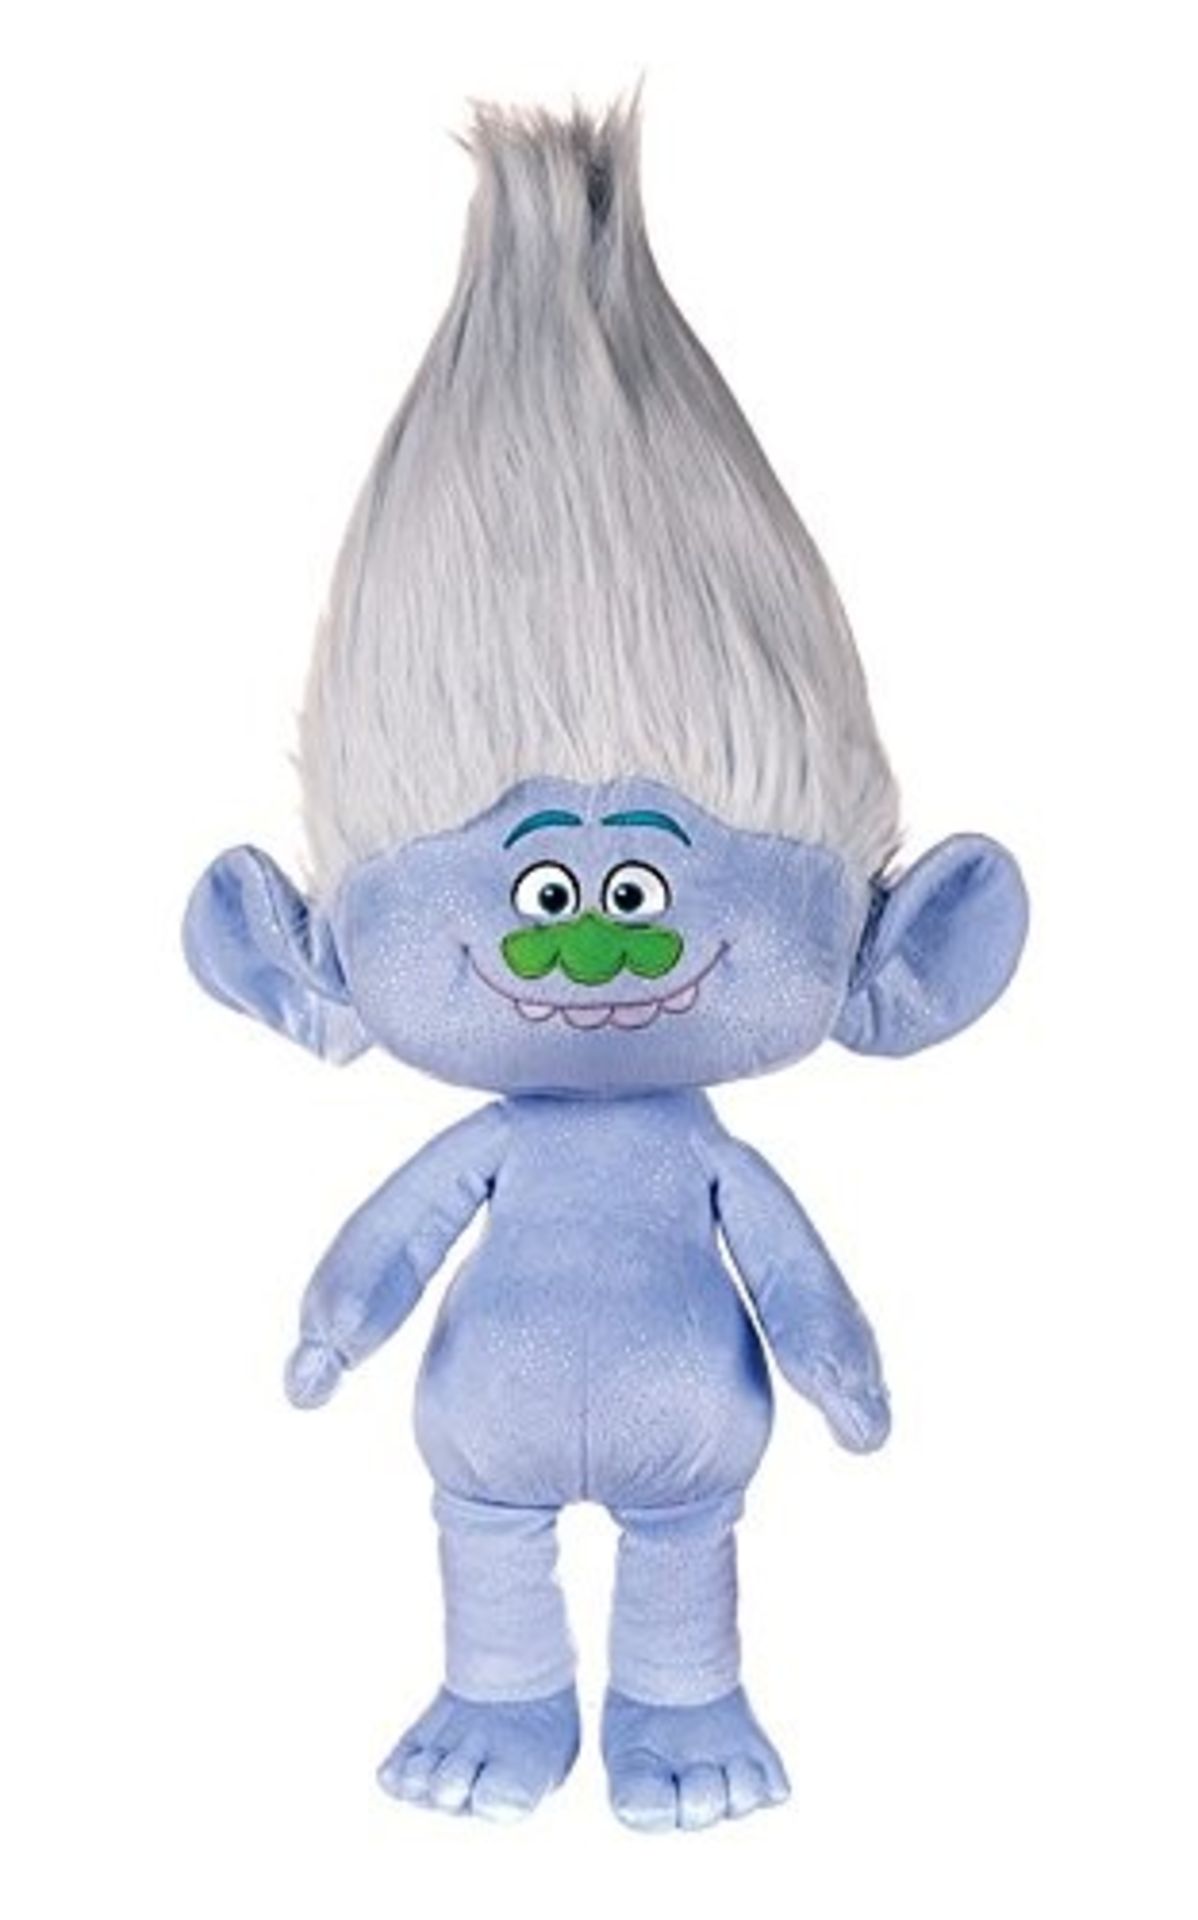 1 TROLLS PLUSH SOFT TOY APPROX 14" - GUY DIAMOND / LOOSE STITCHING ON THE BACK WILL NEED RE-SEWING /